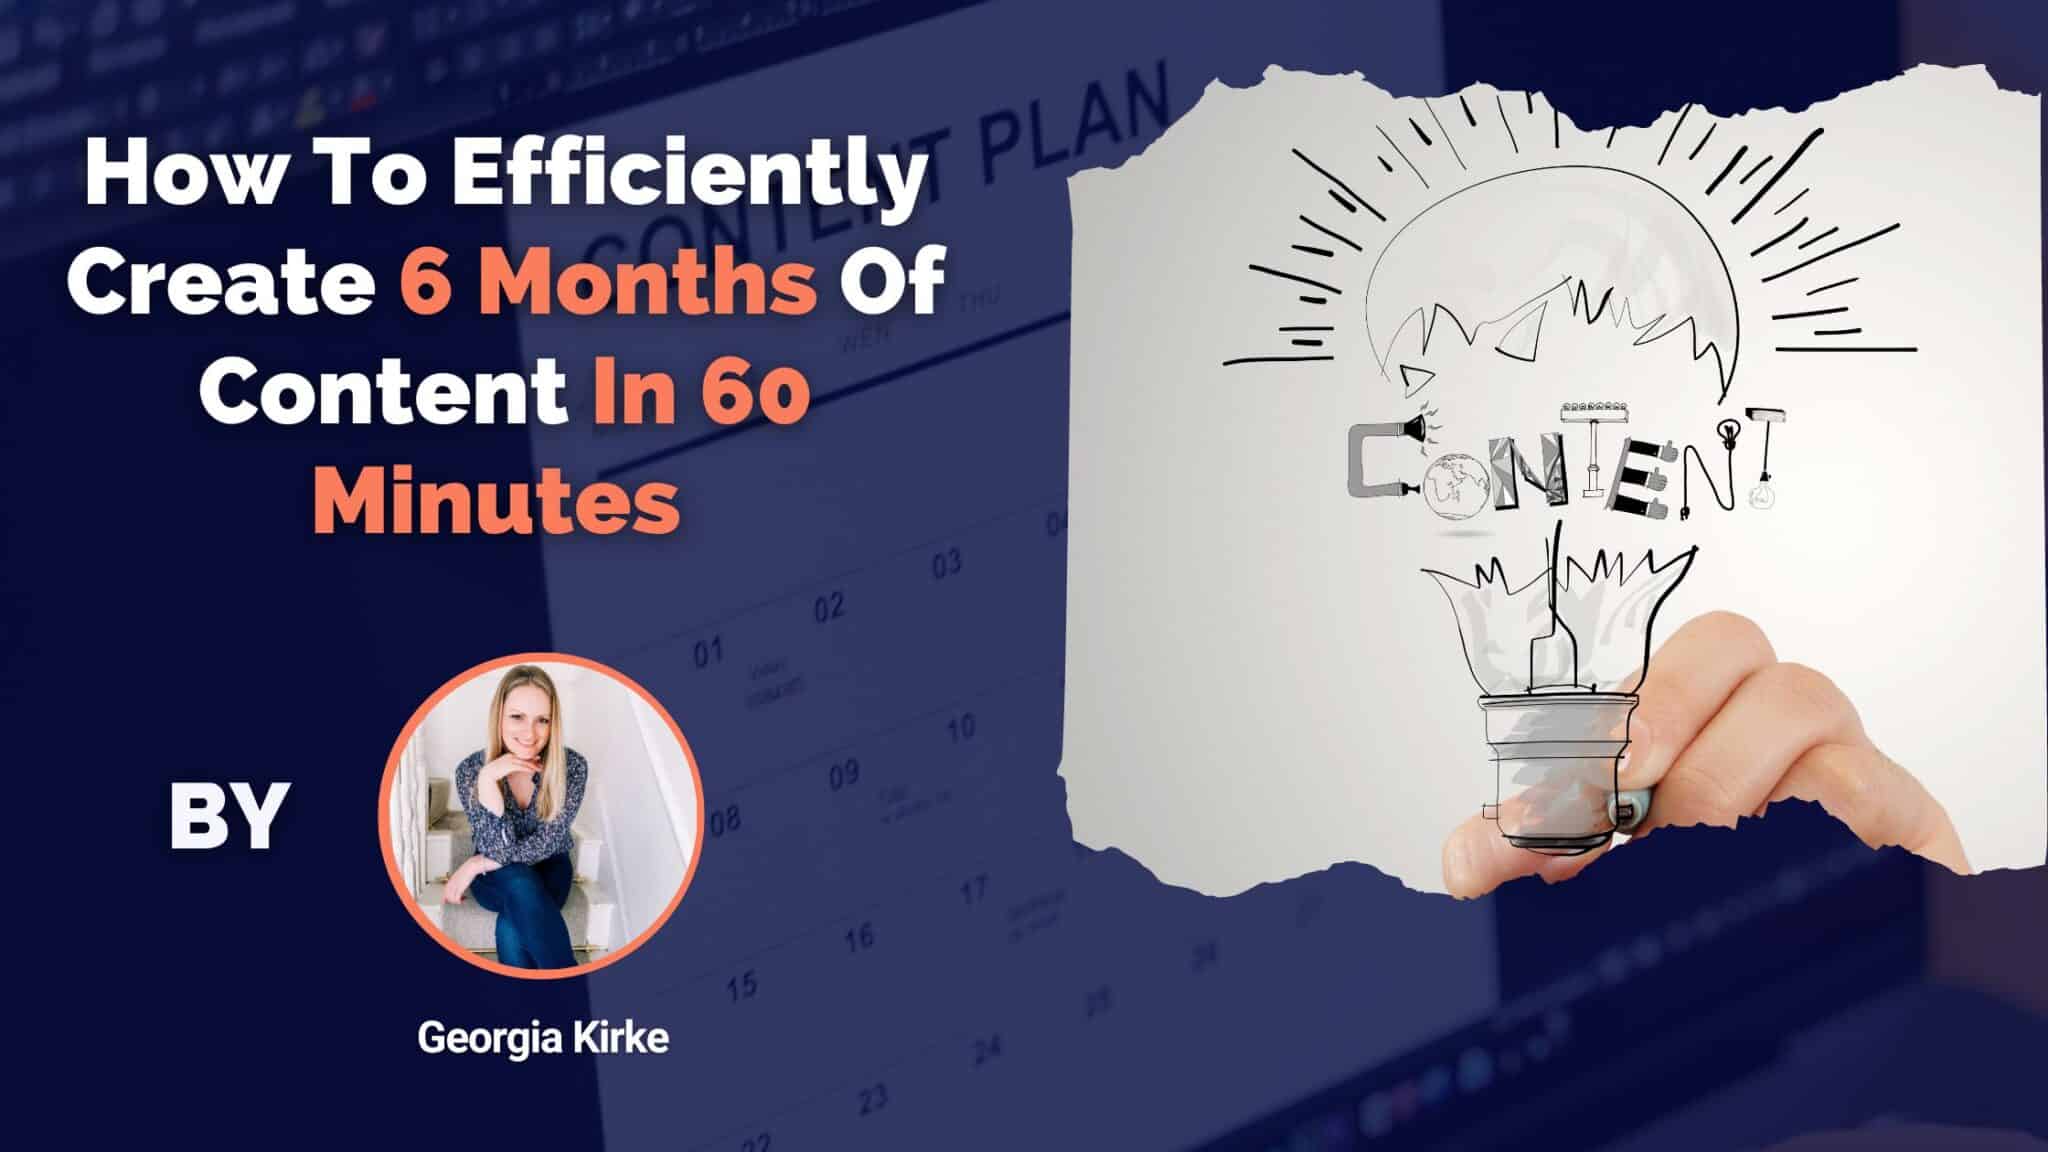 How To Efficiently Create 6 Months Of Content In 60 Minutes